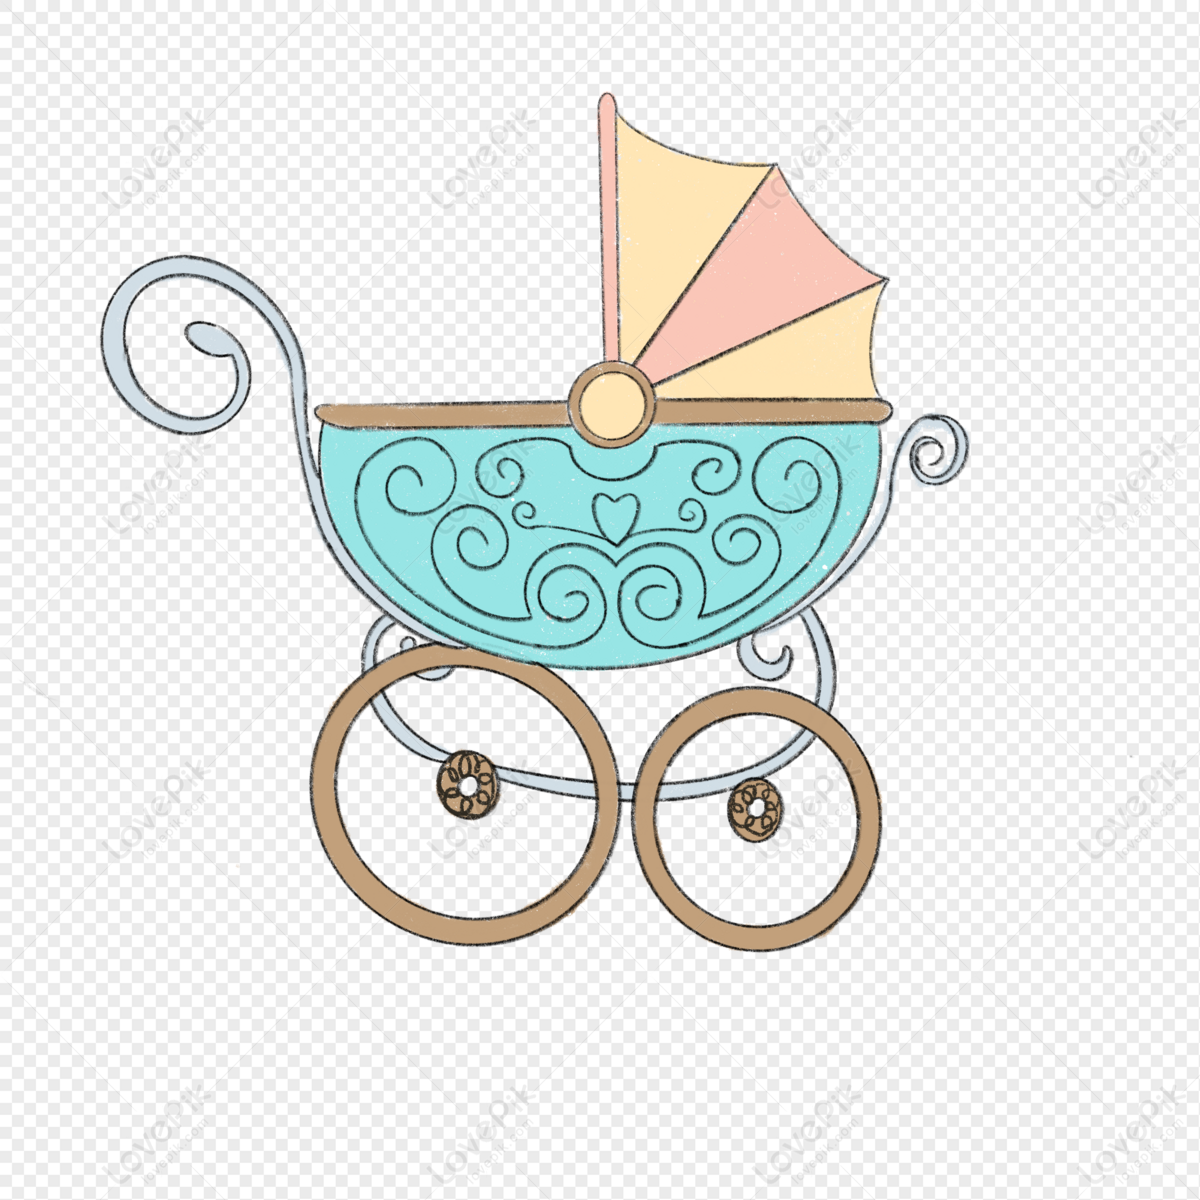 Blue Baby Carriage PNG Transparent Background And Clipart Image For Free  Download - Lovepik | 401537950